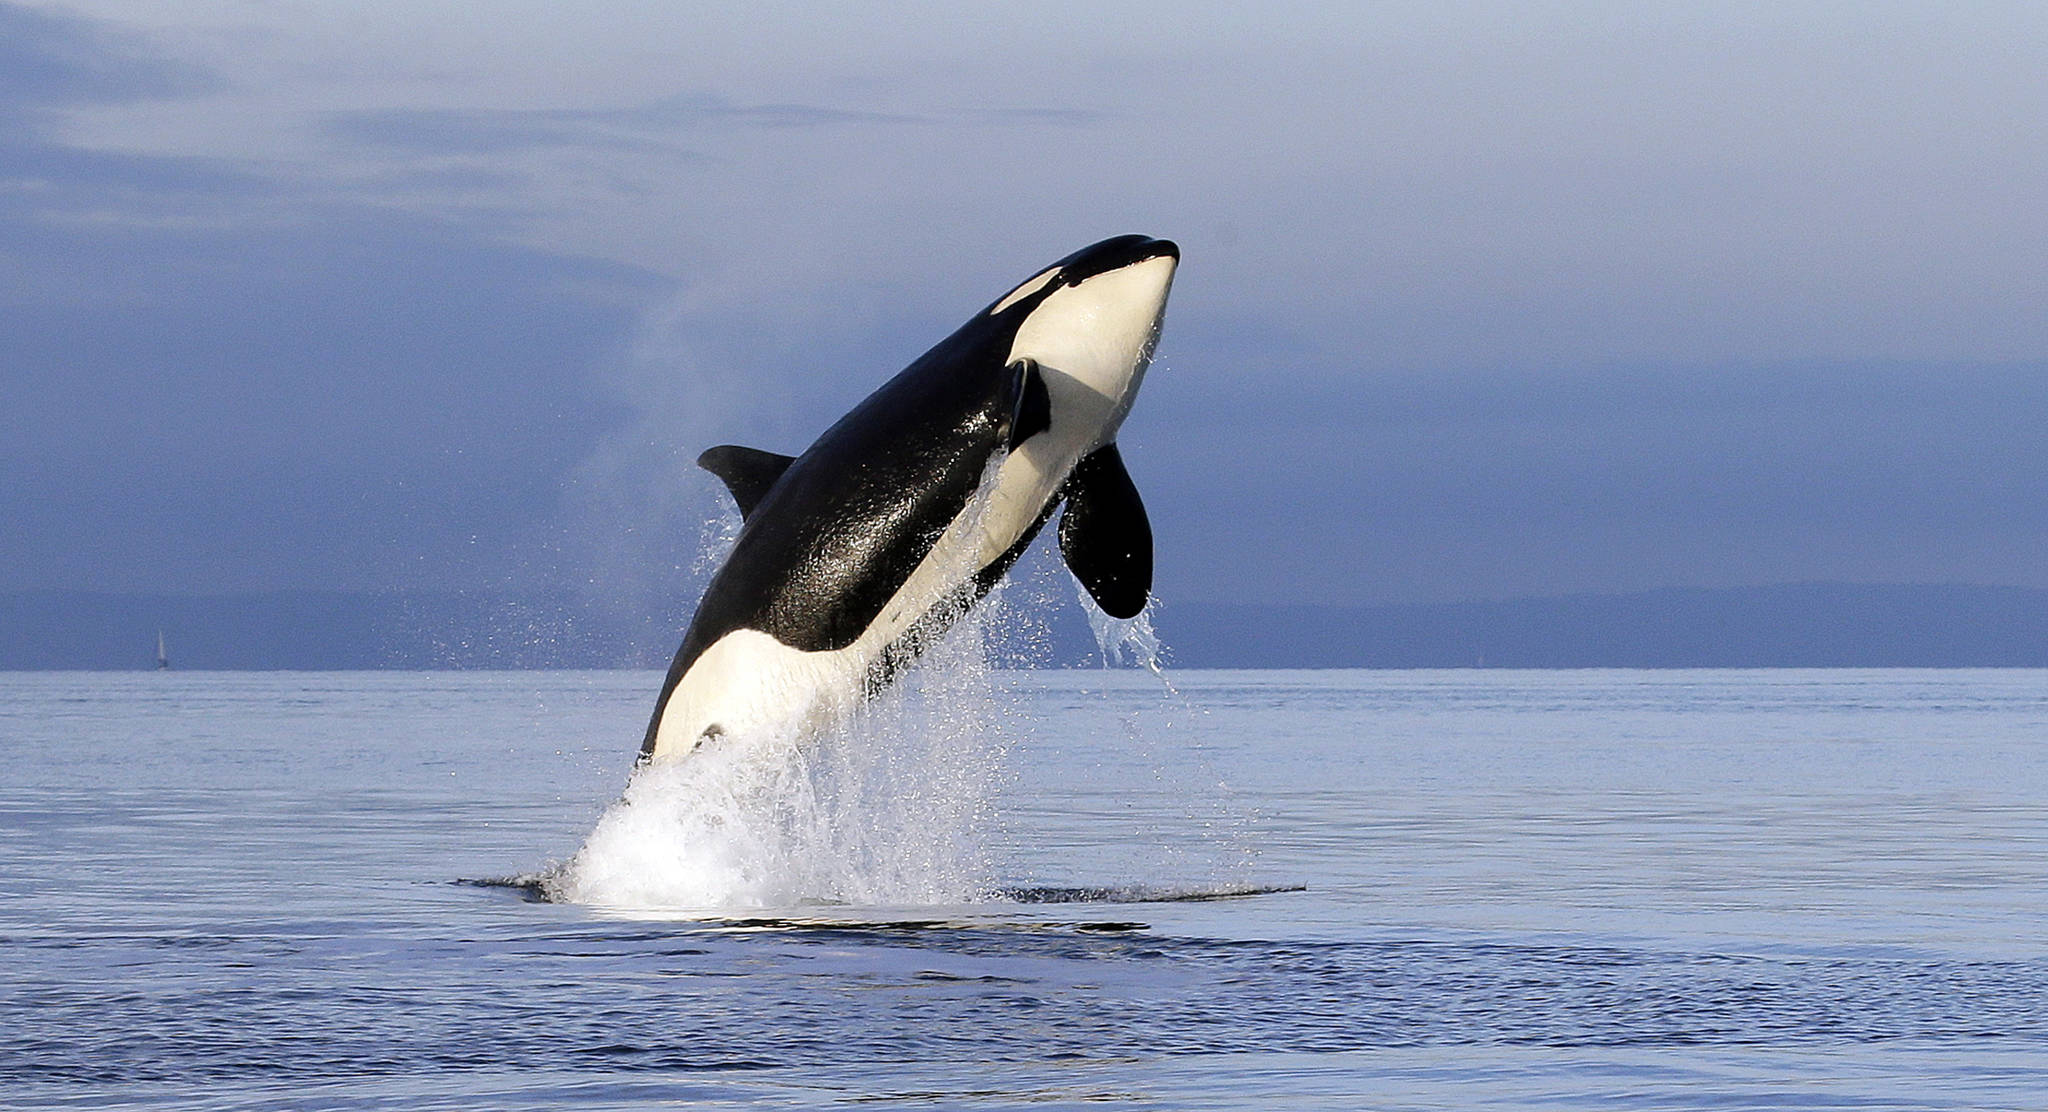 In this Jan. 18, 2014 photo, an endangered female orca leaps from the water while breaching in Puget Sound west of Seattle, Wash. For years, scientists have identified dams, pollution and vessel noise as causes of the troubling decline of the Pacific Northwest’s resident killer whales. Now, they may have found a new and more surprising culprit: pink salmon. Salmon researchers perusing data on the website of the Center for Whale Research noticed a startling trend: that for the past two decades, significantly more of the whales have died in even-numbered years than in odd years. In a newly published paper, they speculate that the pattern is related to pink salmon, which return to the waters between Washington state and Canada in enormous numbers every other year. (Elaine Thompson | Associated Press File)